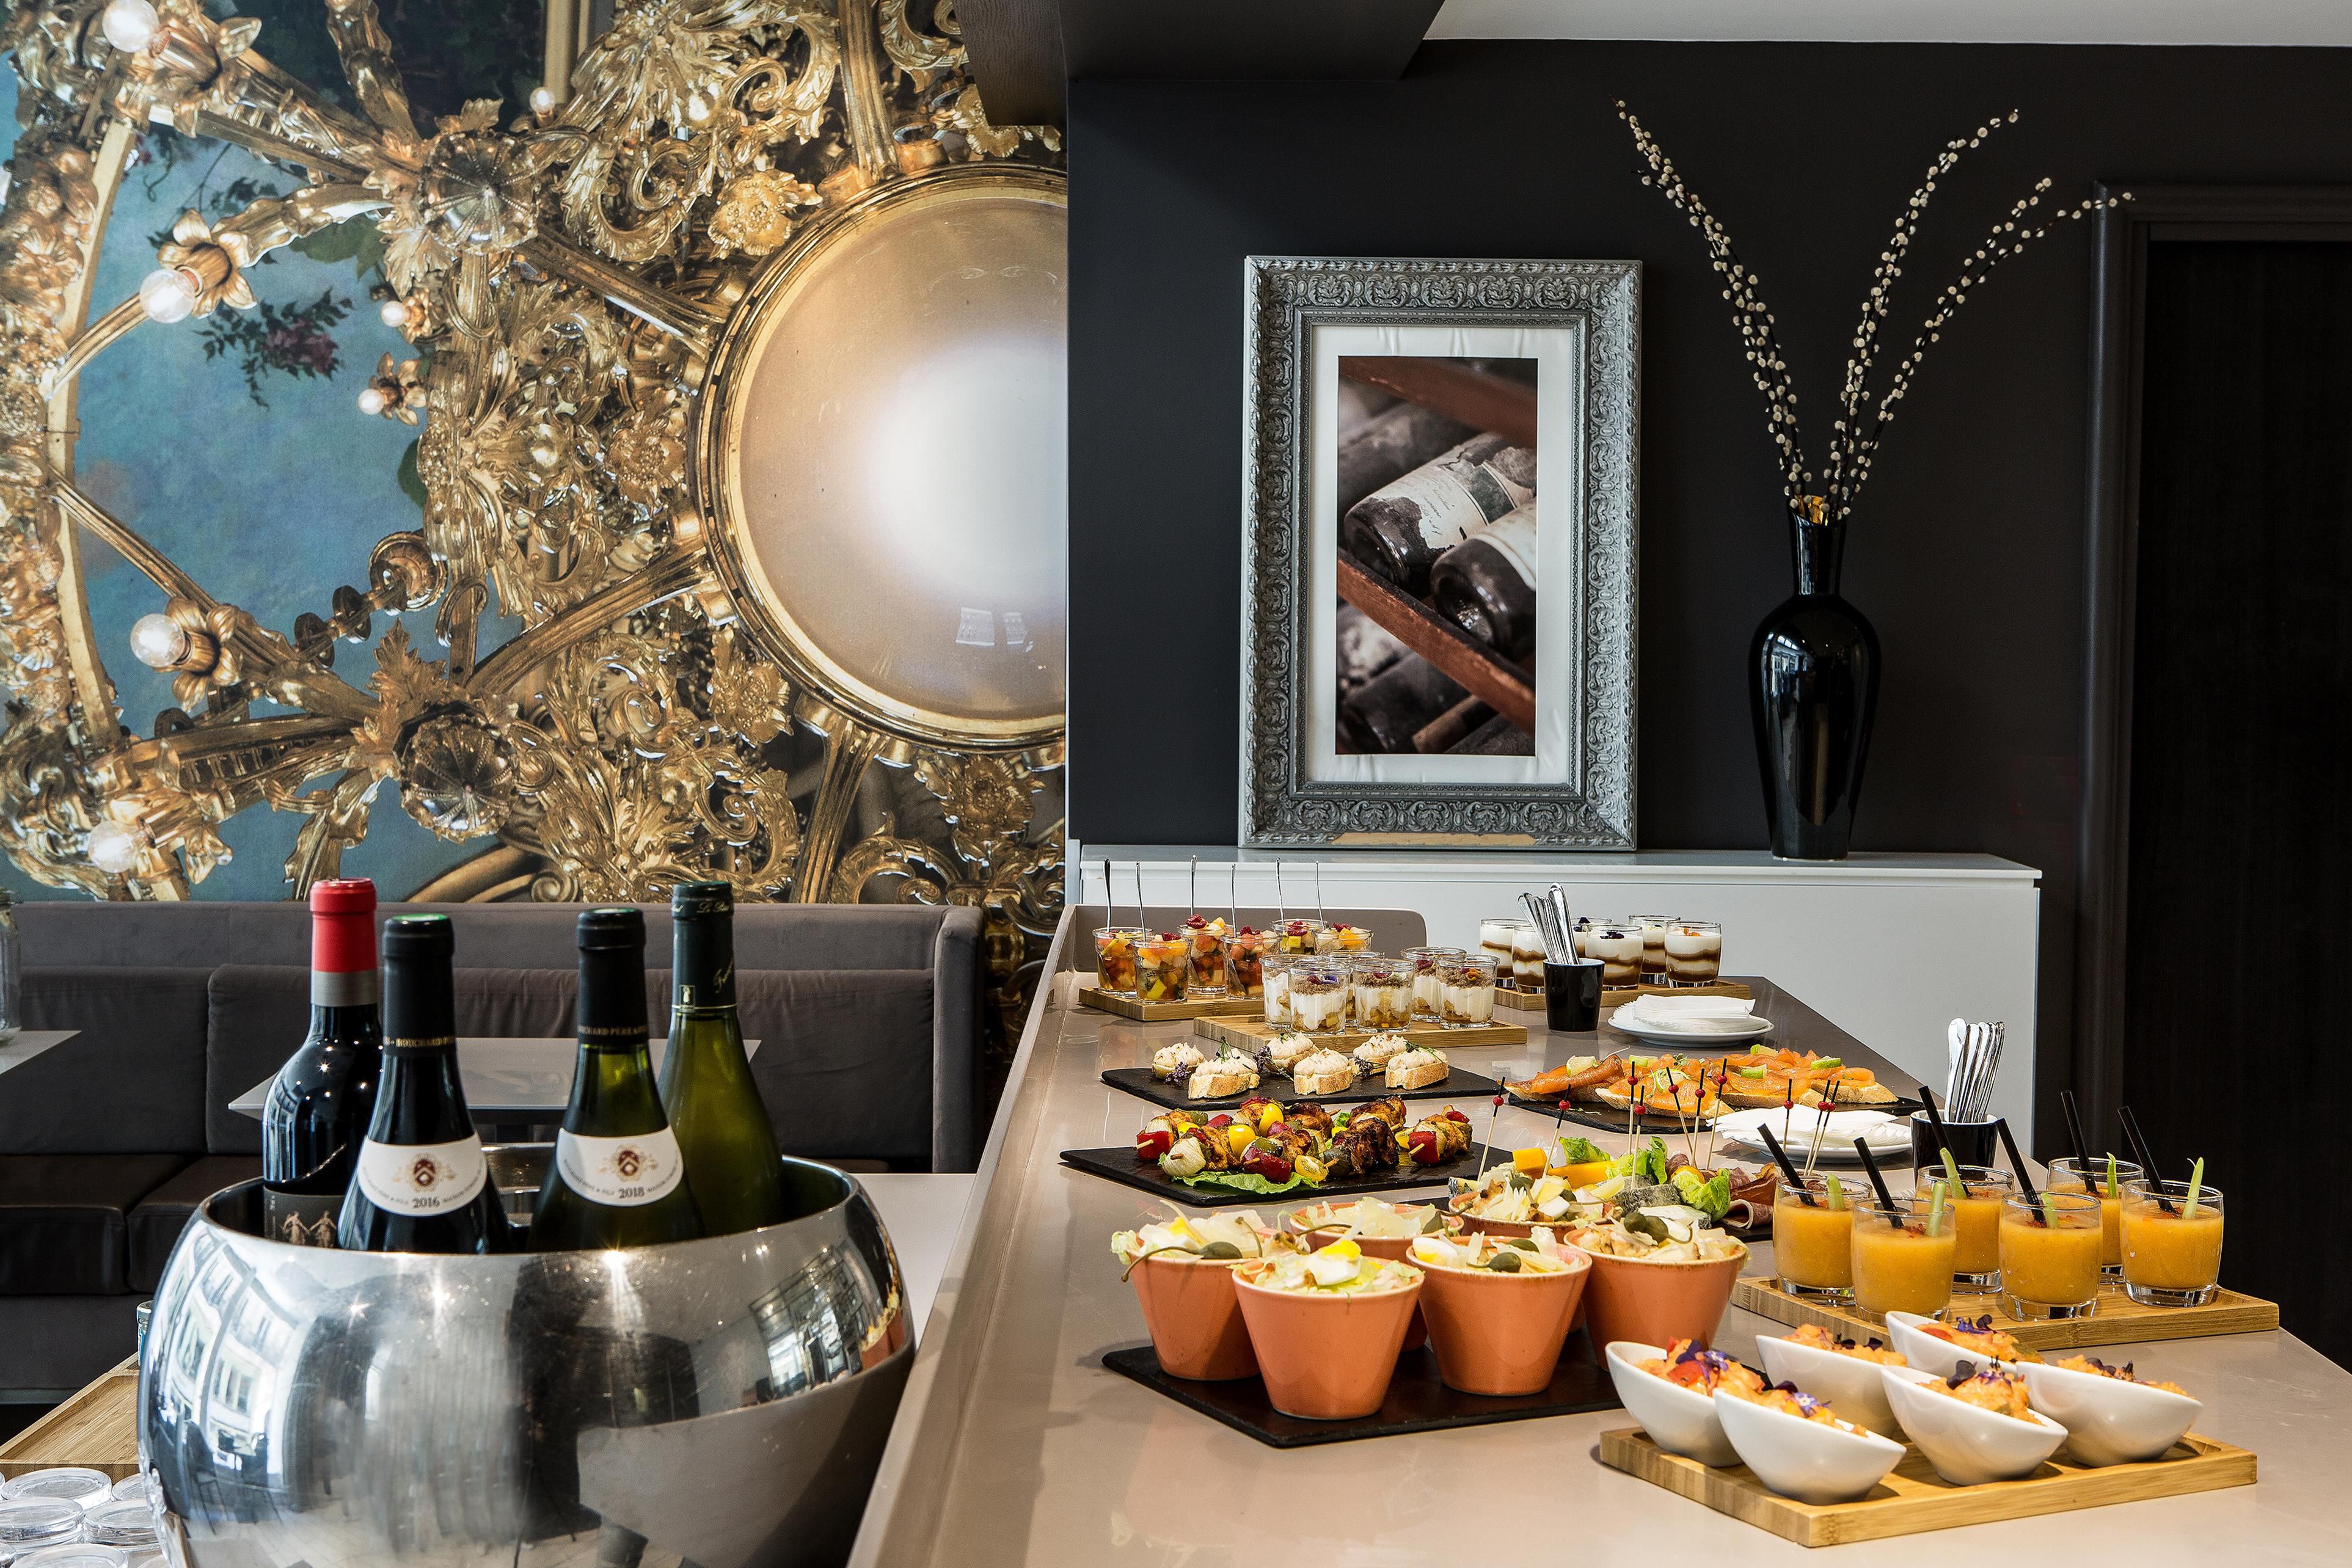 The Indigo Paris-Opéra hotel will be happy to organize your birthday or your departure drink so that you and your guests have an unforgettable moment!